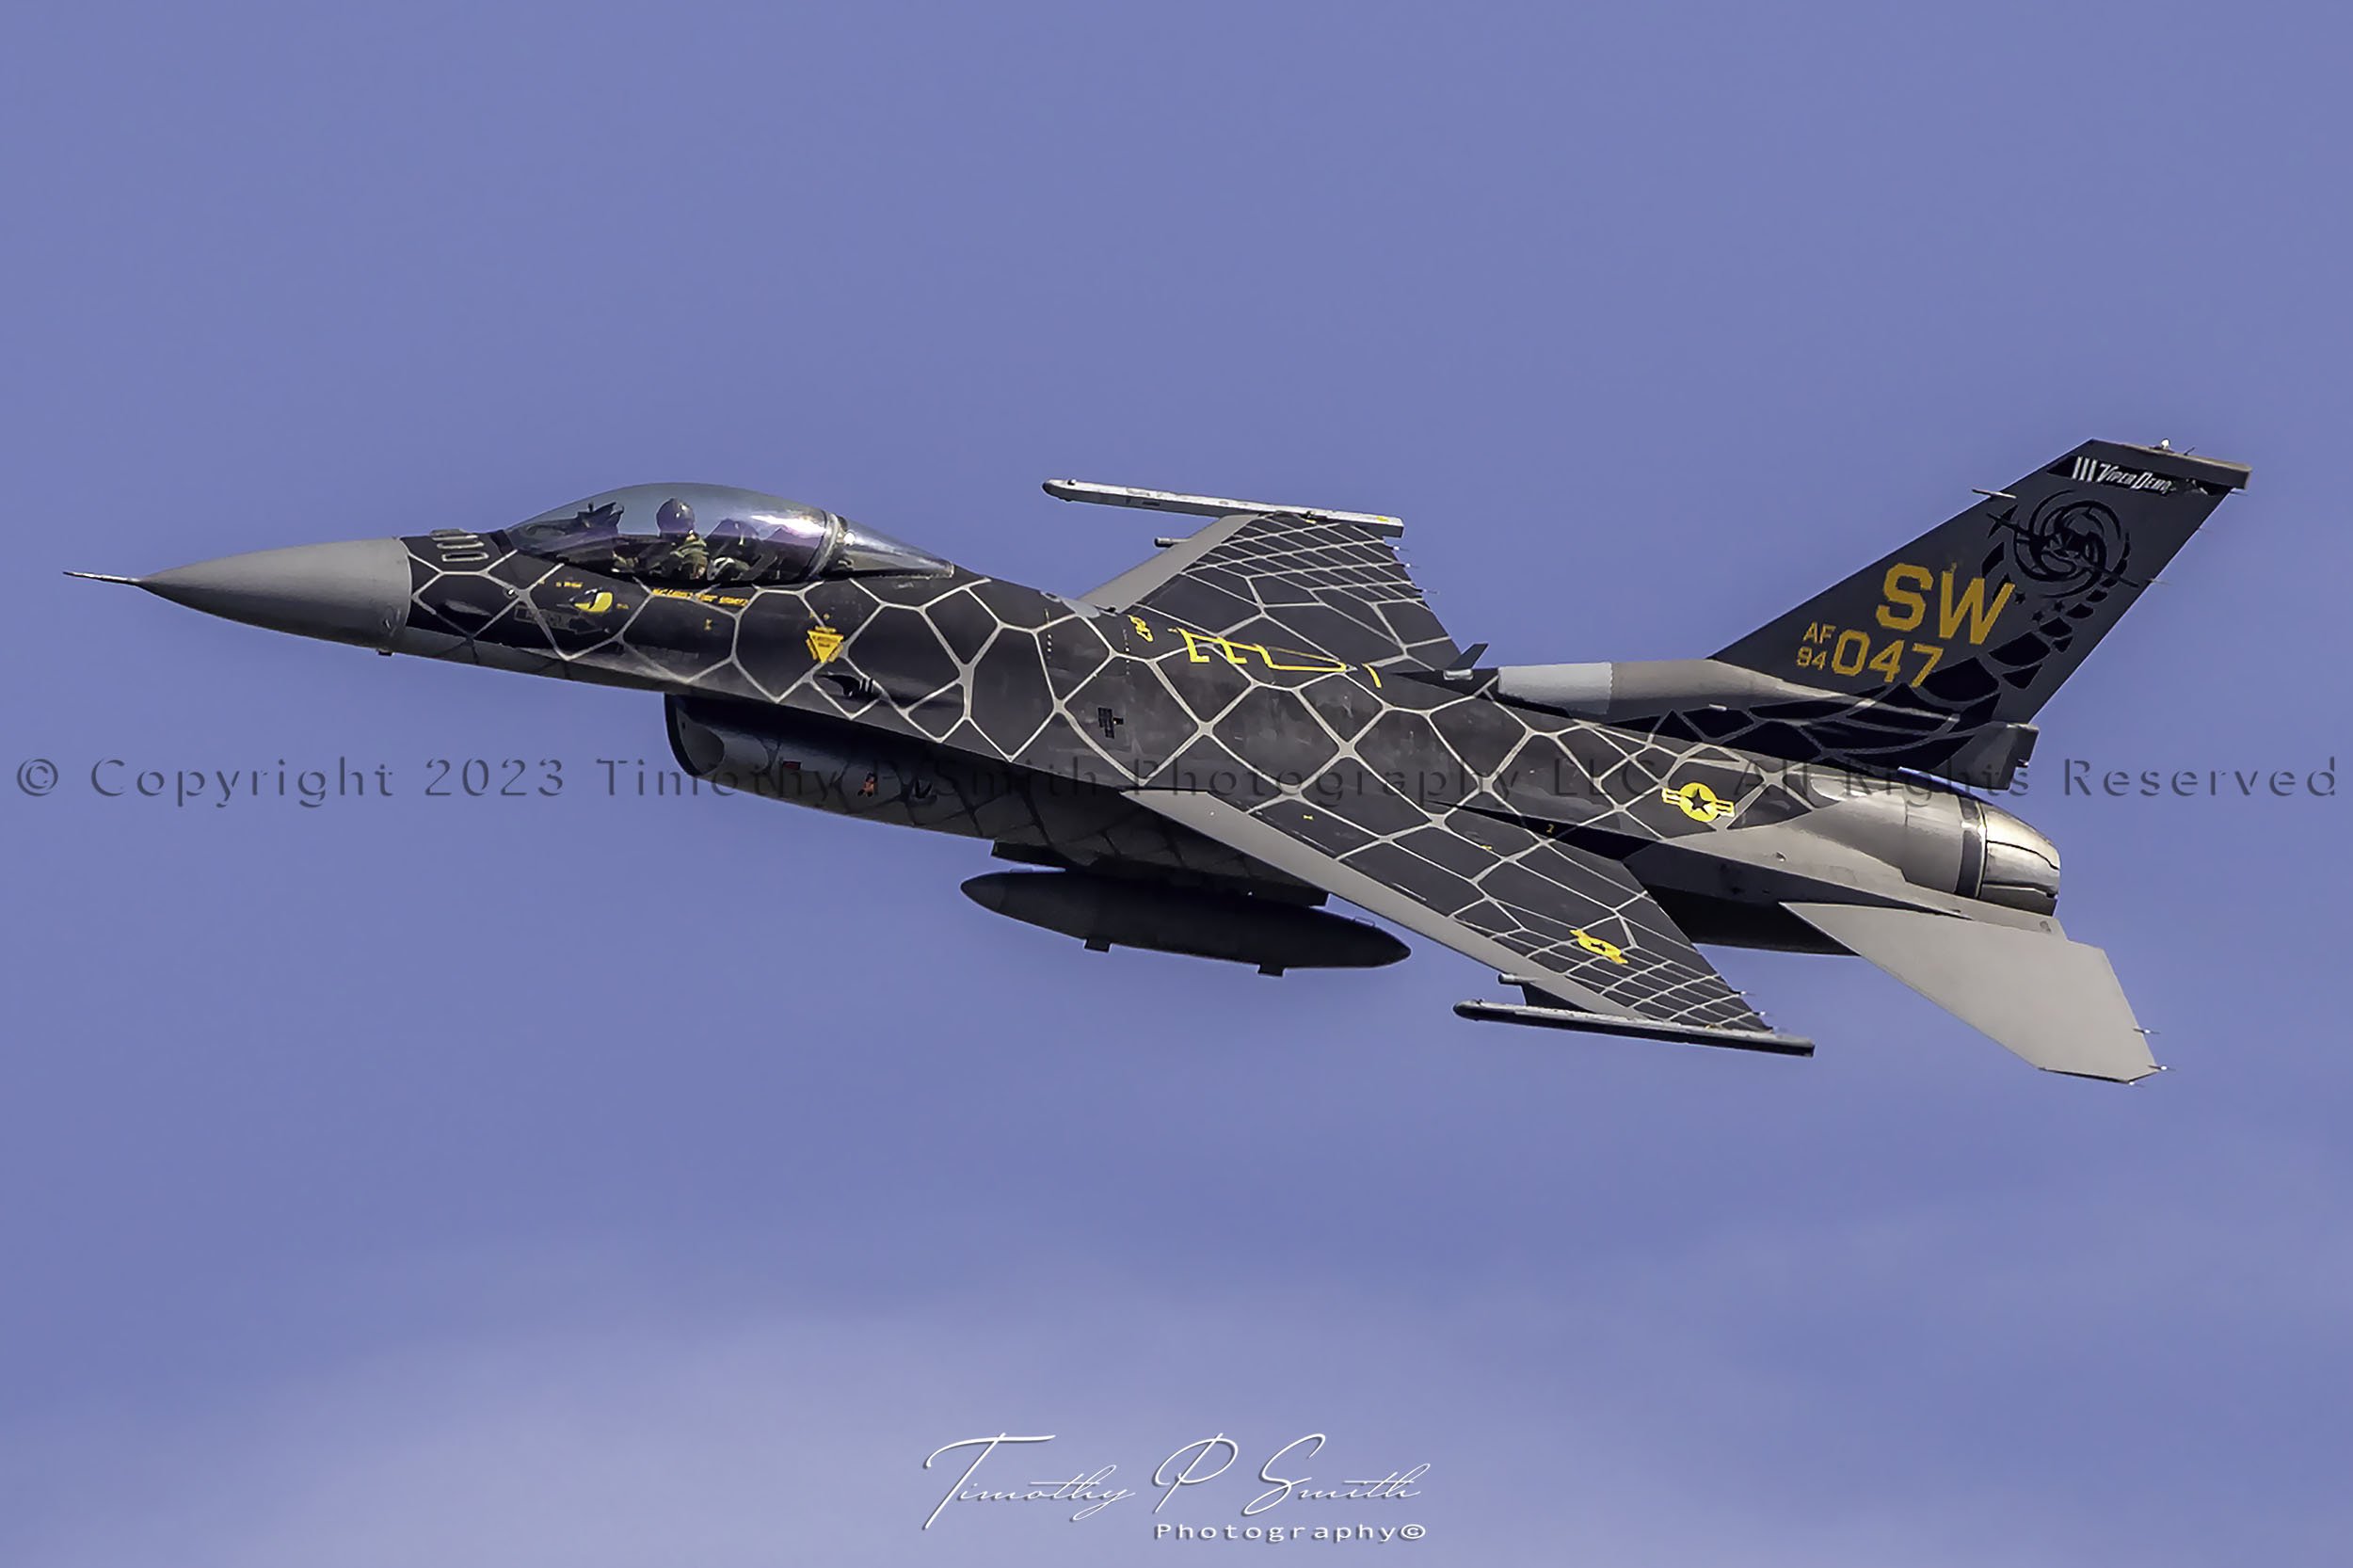 F 16 Viper Demo Team Aviation Photography By Timothy Paul Smith